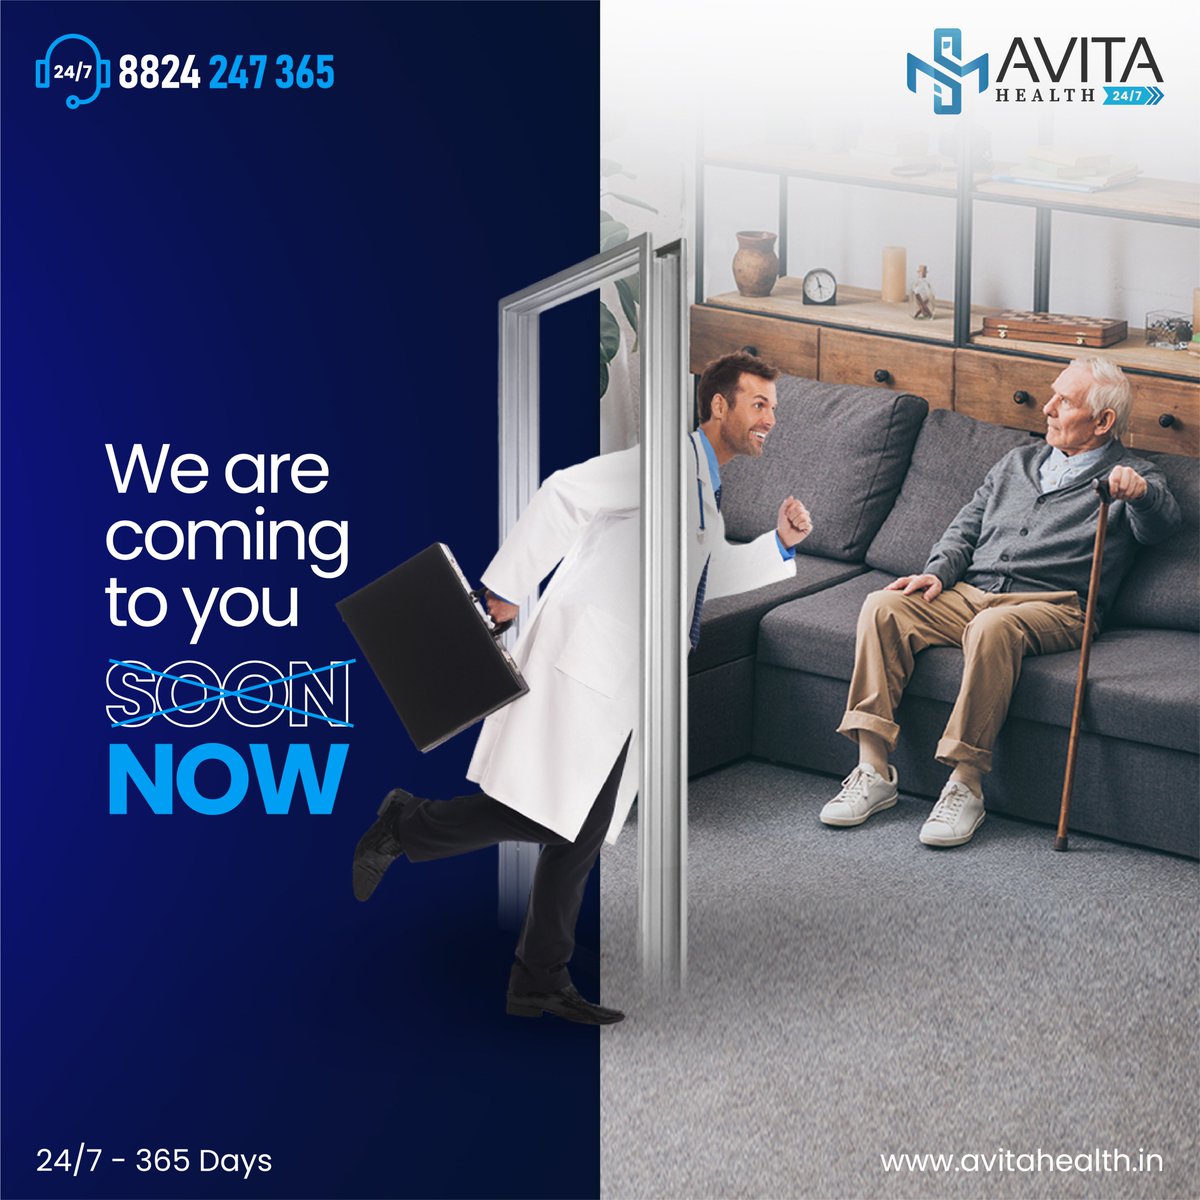 Bringing healthcare to your doorstep within 30-40 minutes. Your well-being is our priority!

#AvitaHealth24x7 #AtHomeHealthcare #HomeHealthcare #HomeMedicalCare #DoctorOnCall #DoctorAtHome #DentalTreatments #AestheticTreatment #future #healthcarefuture #fasthealthy #health